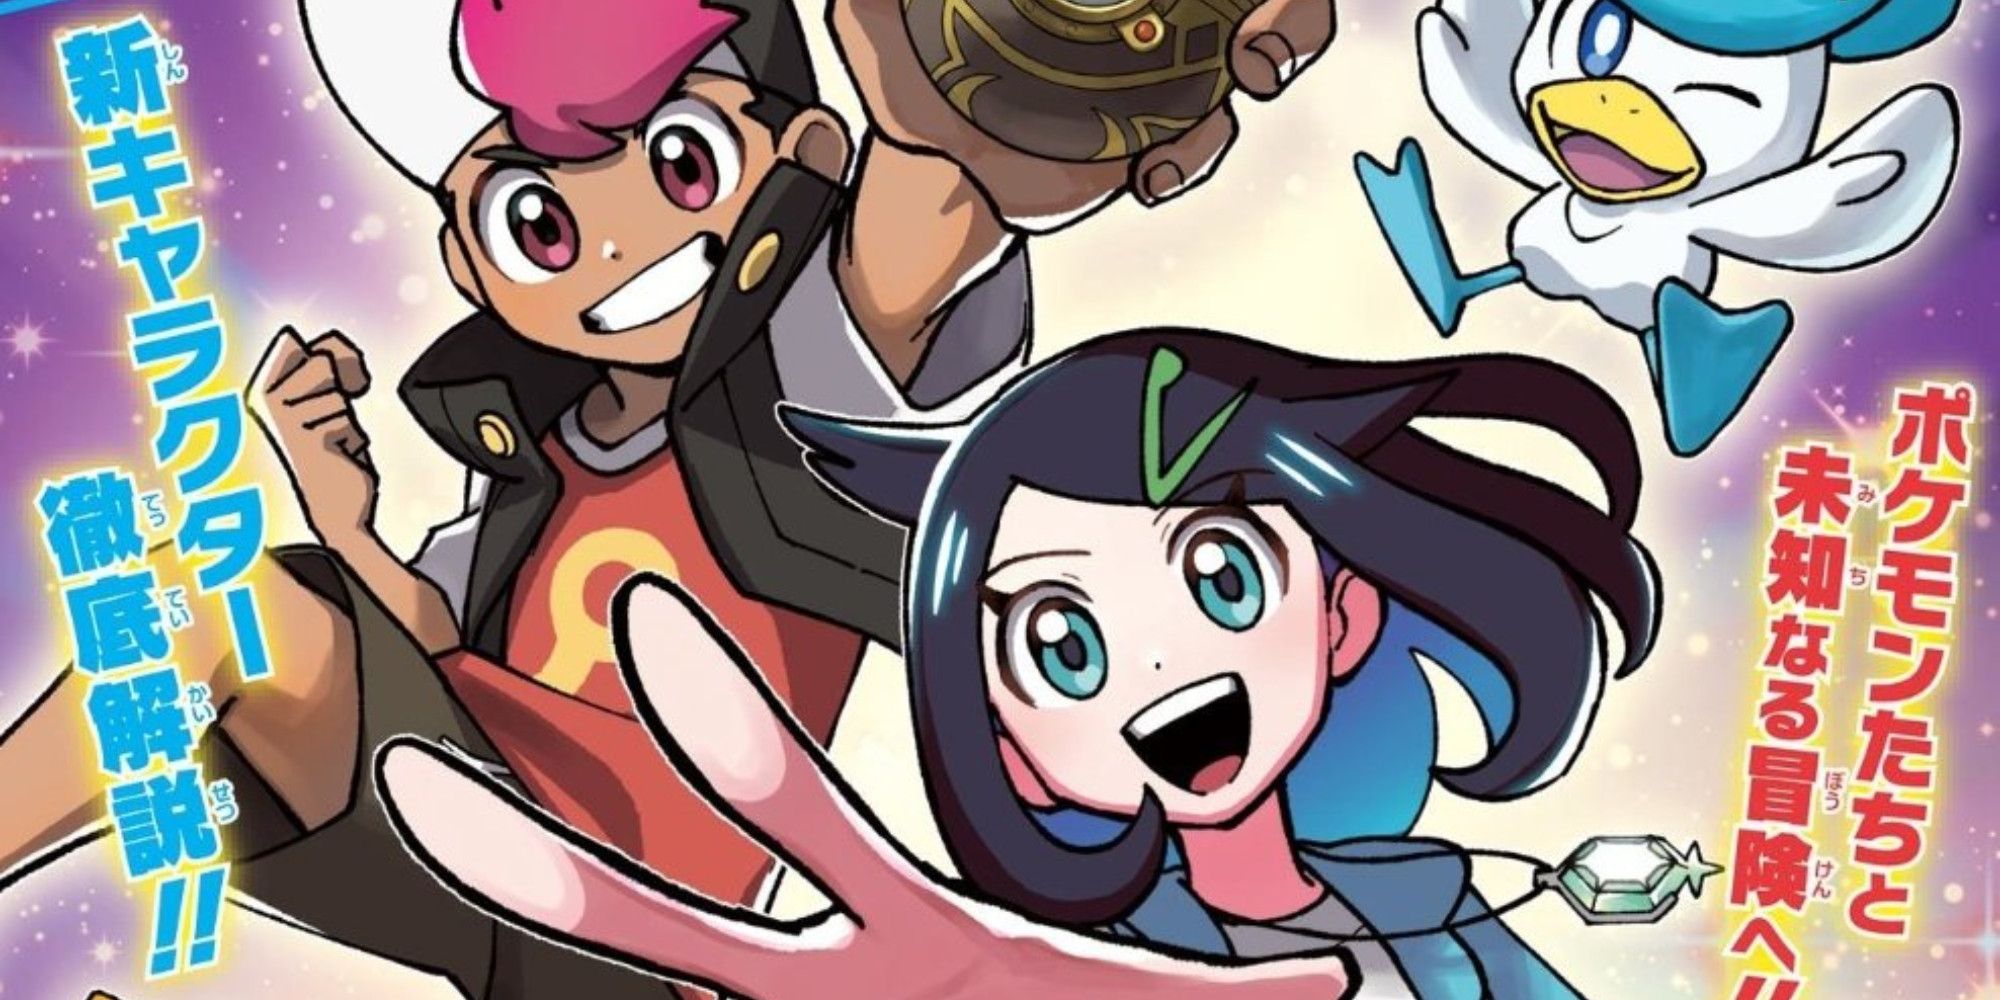 Pokemon Anime’s New Protagonists Liko And Roy Are Getting Their Own Manga Series